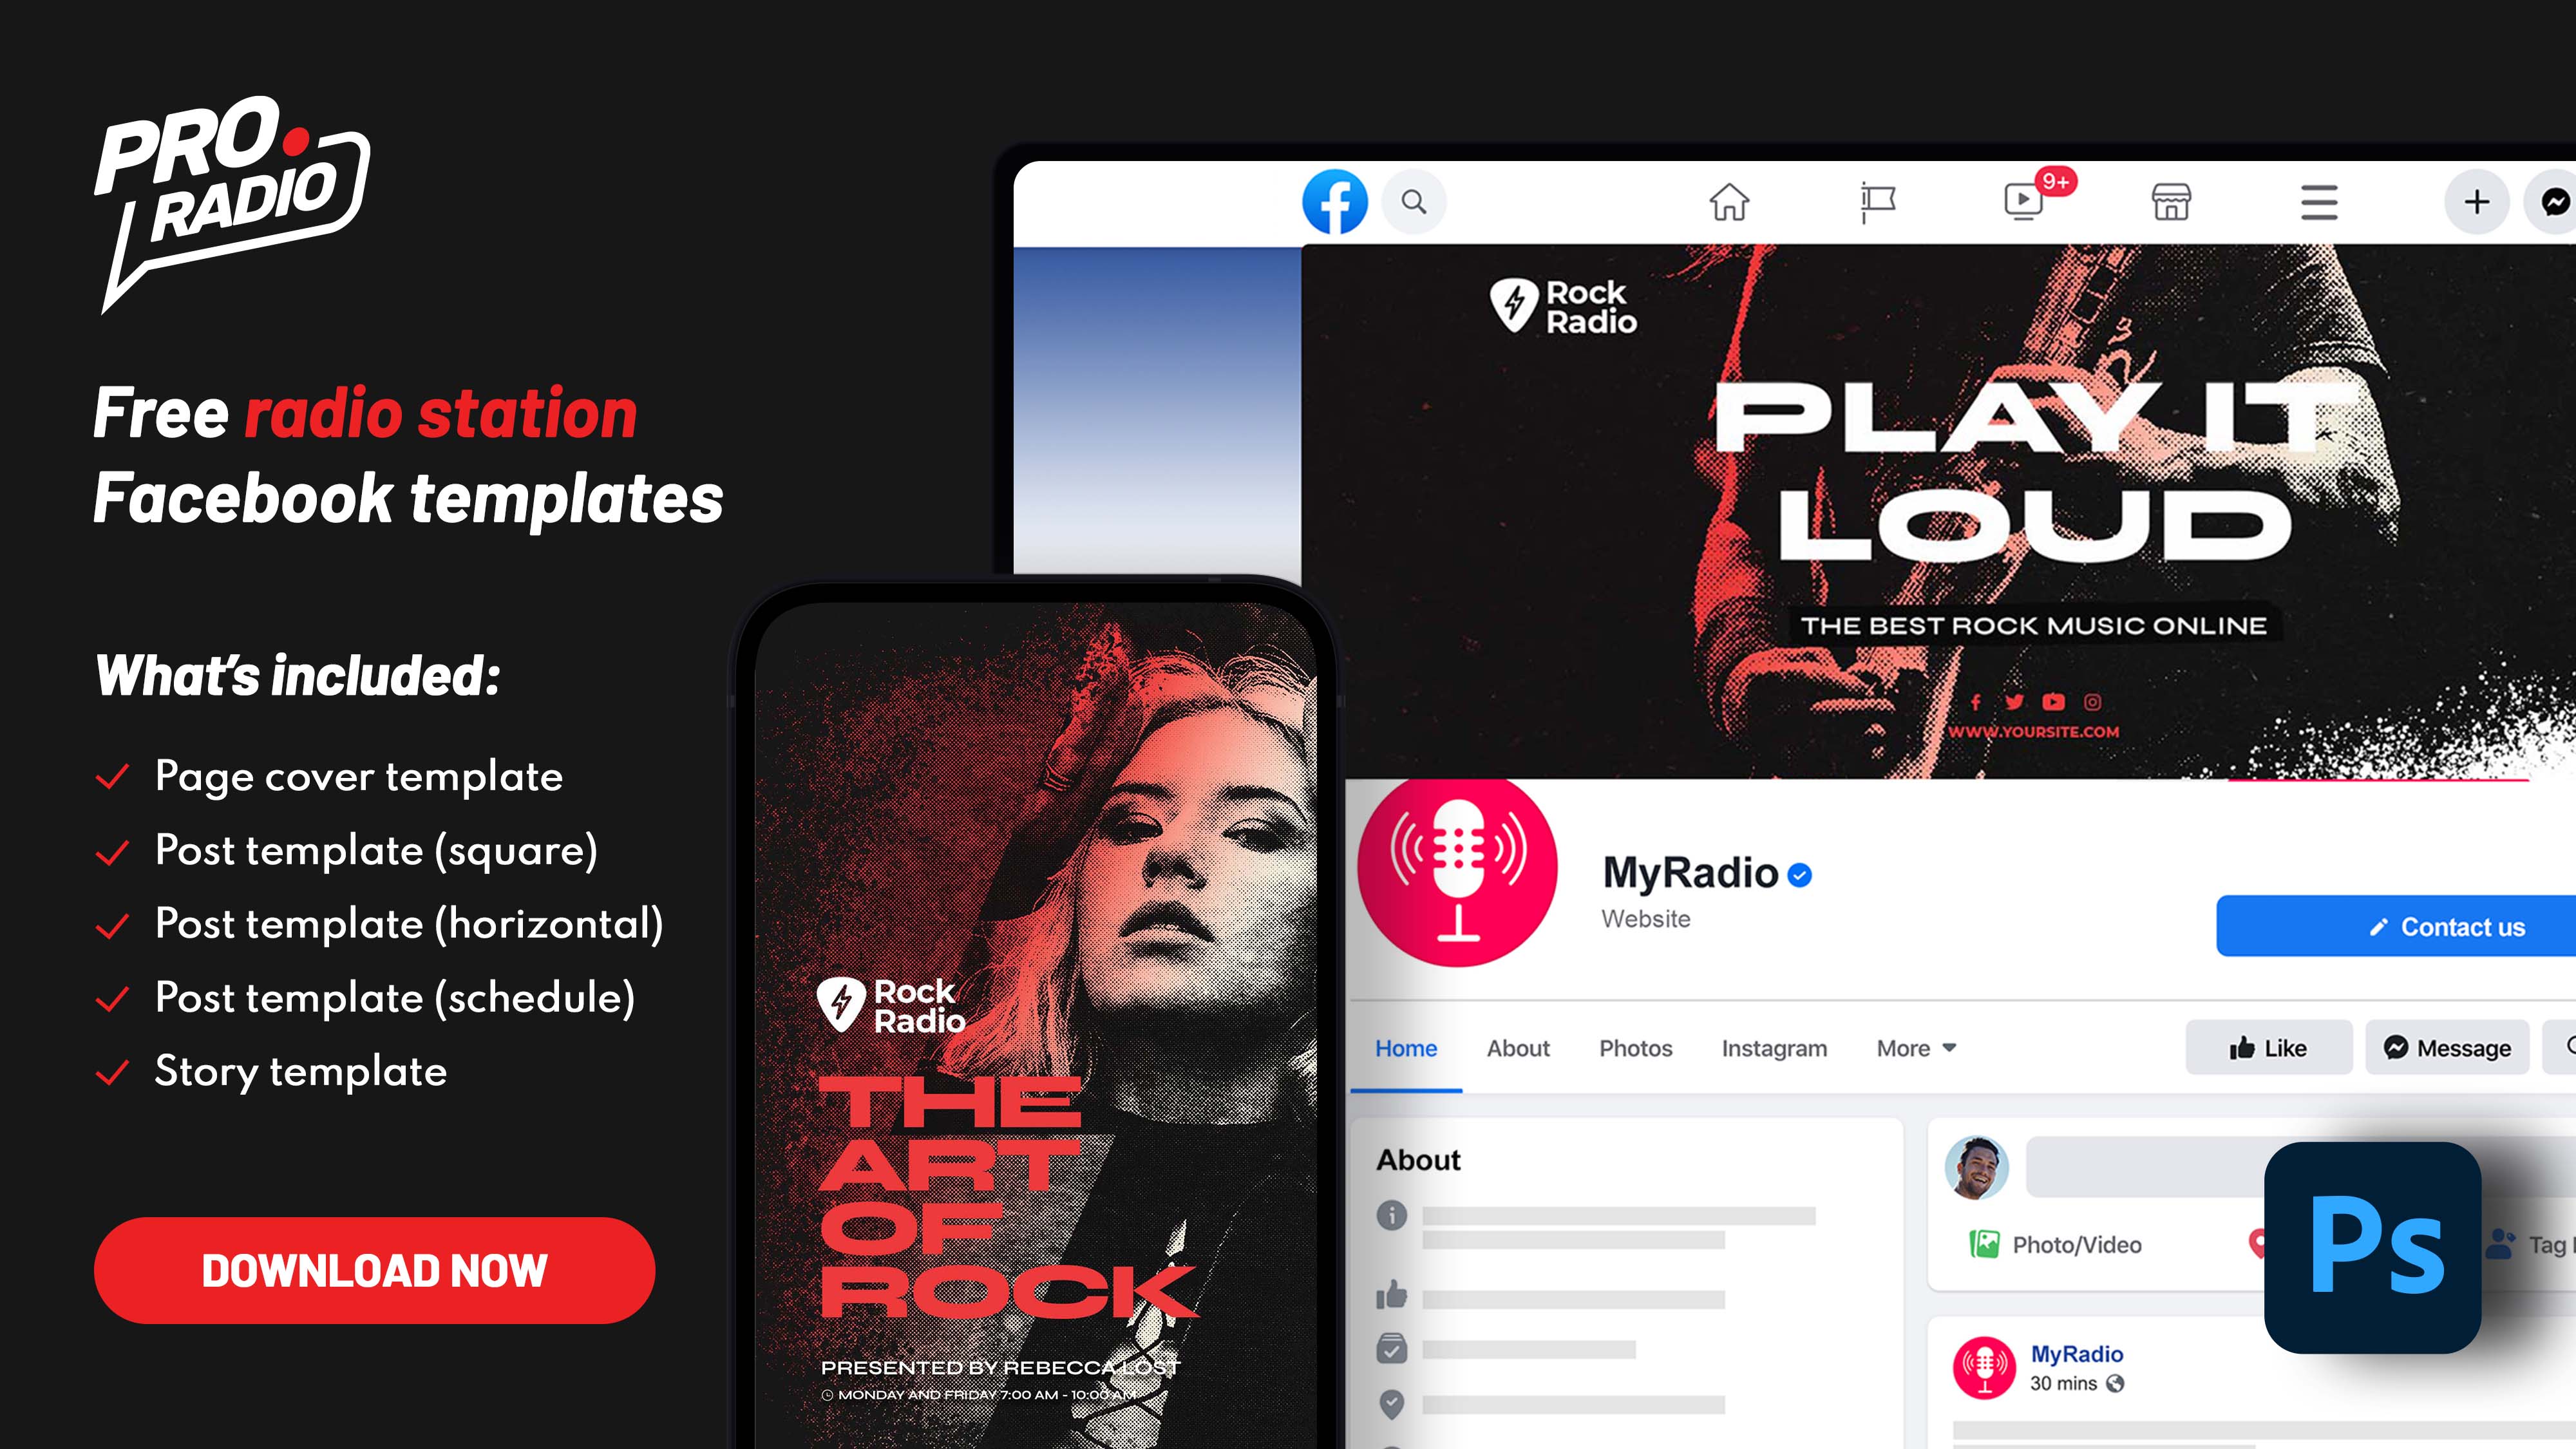 5 Free Rock Radio Station PSD templates – DOWNLOAD NOW! 